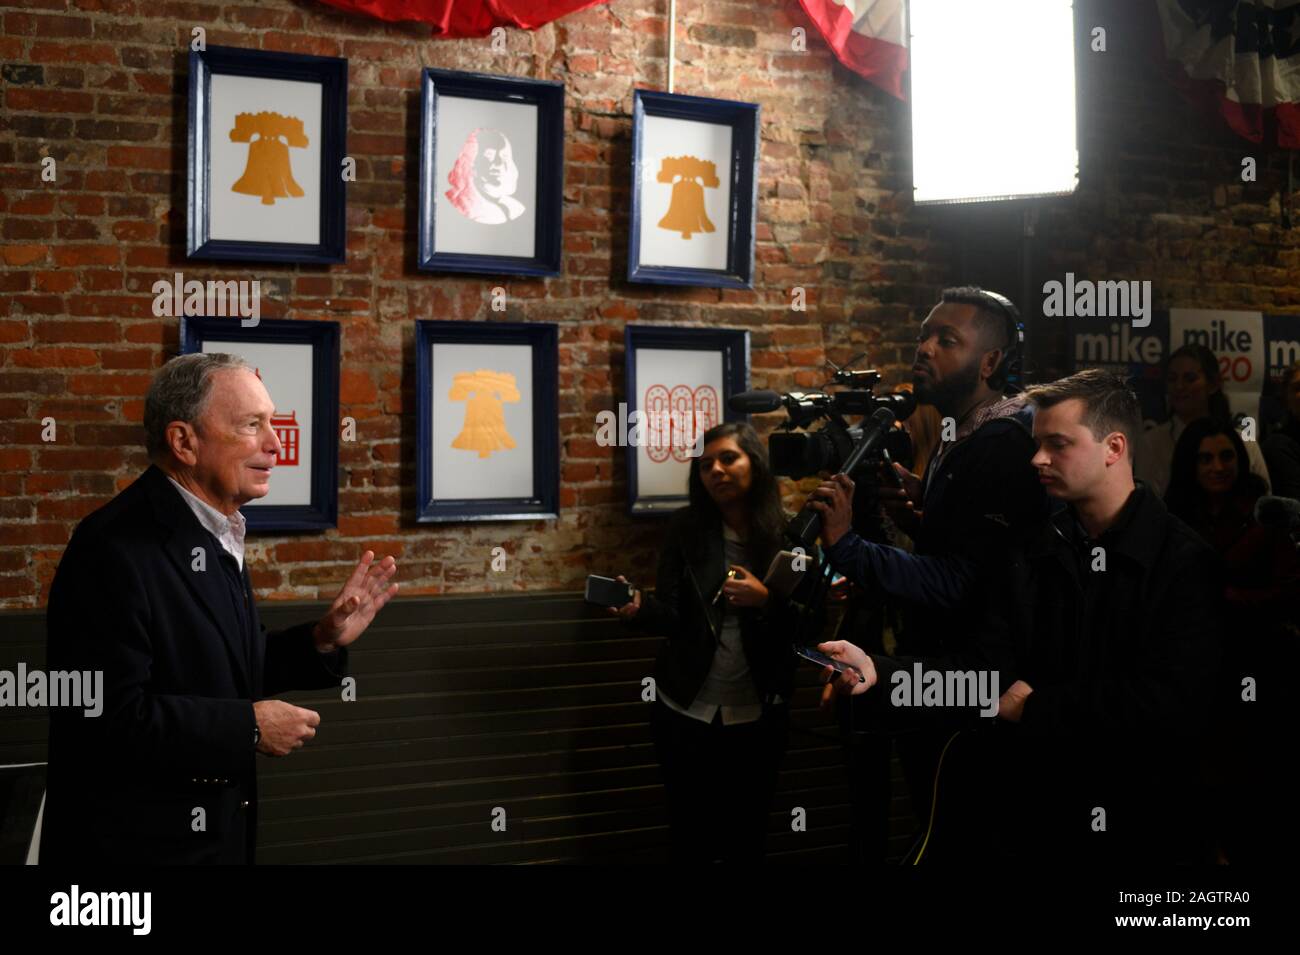 Pennsylvania, USA. 21st December 2019. US presidential hopeful Michael Bloomberg opens a local campaign field office in Philadelphia, PA, on December 21, 2019. The former mayor of New York City is the third Democratic candidate to establish a campaign office in the Keystone state. Stock Photo